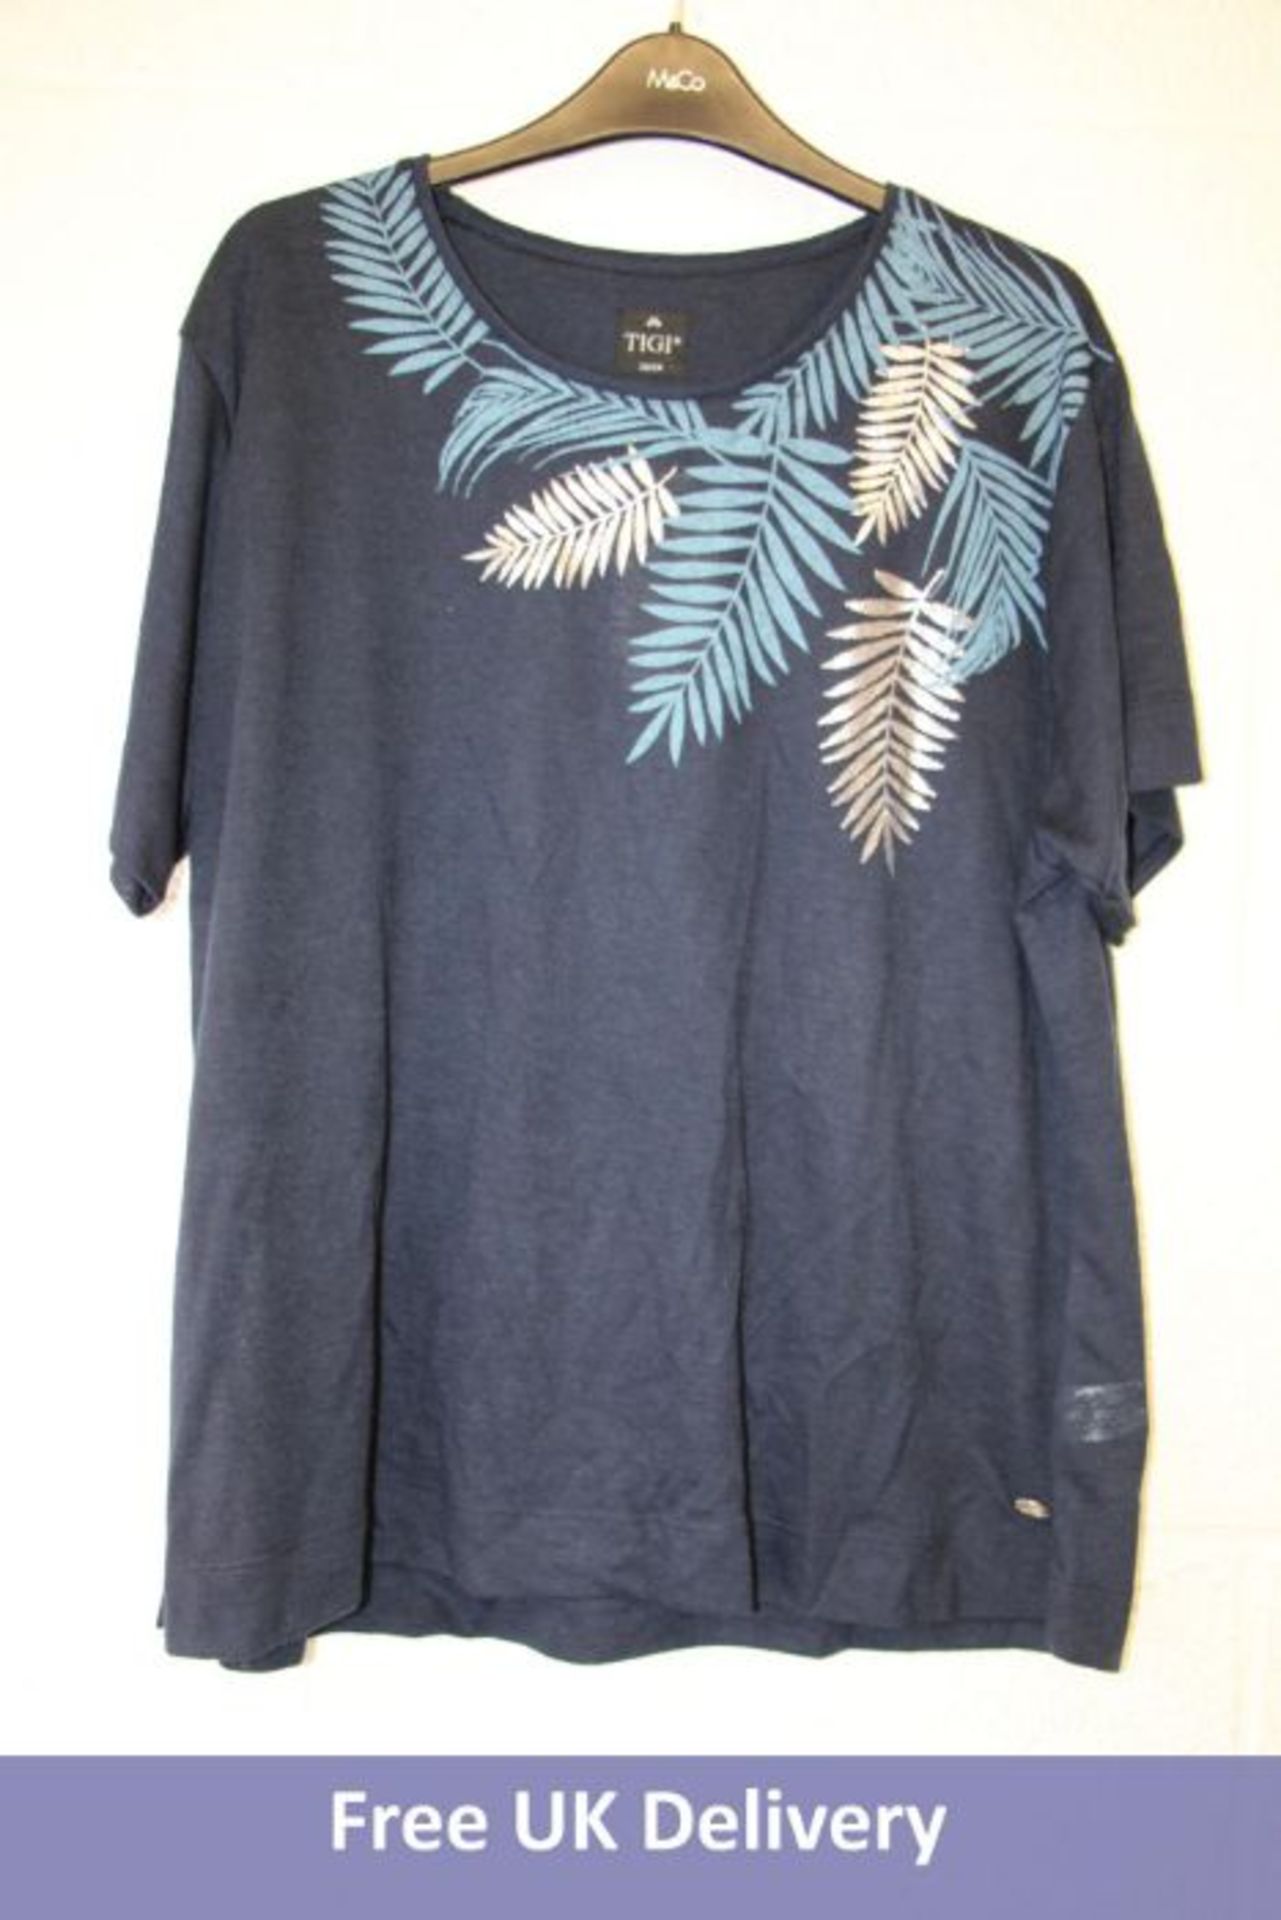 Two Tigi Women's Leaf Print Top, French Navy, Size to include 1x 10/12 and 1x 22/24